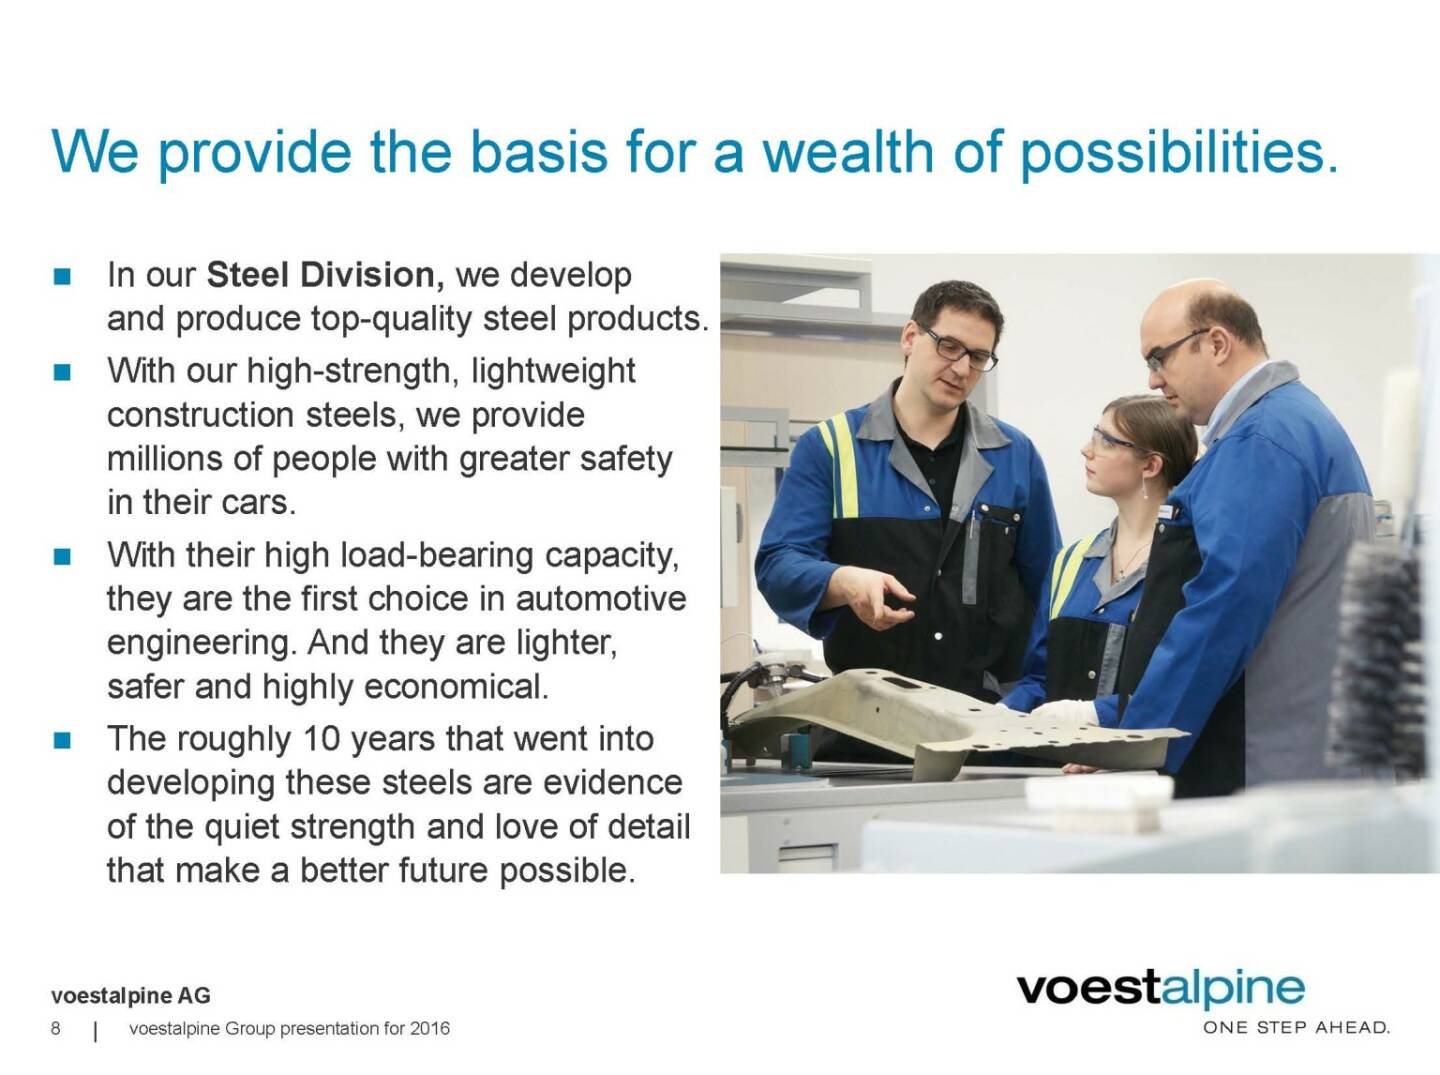 voestalpine - We provide the basis for a wealth of possibilities